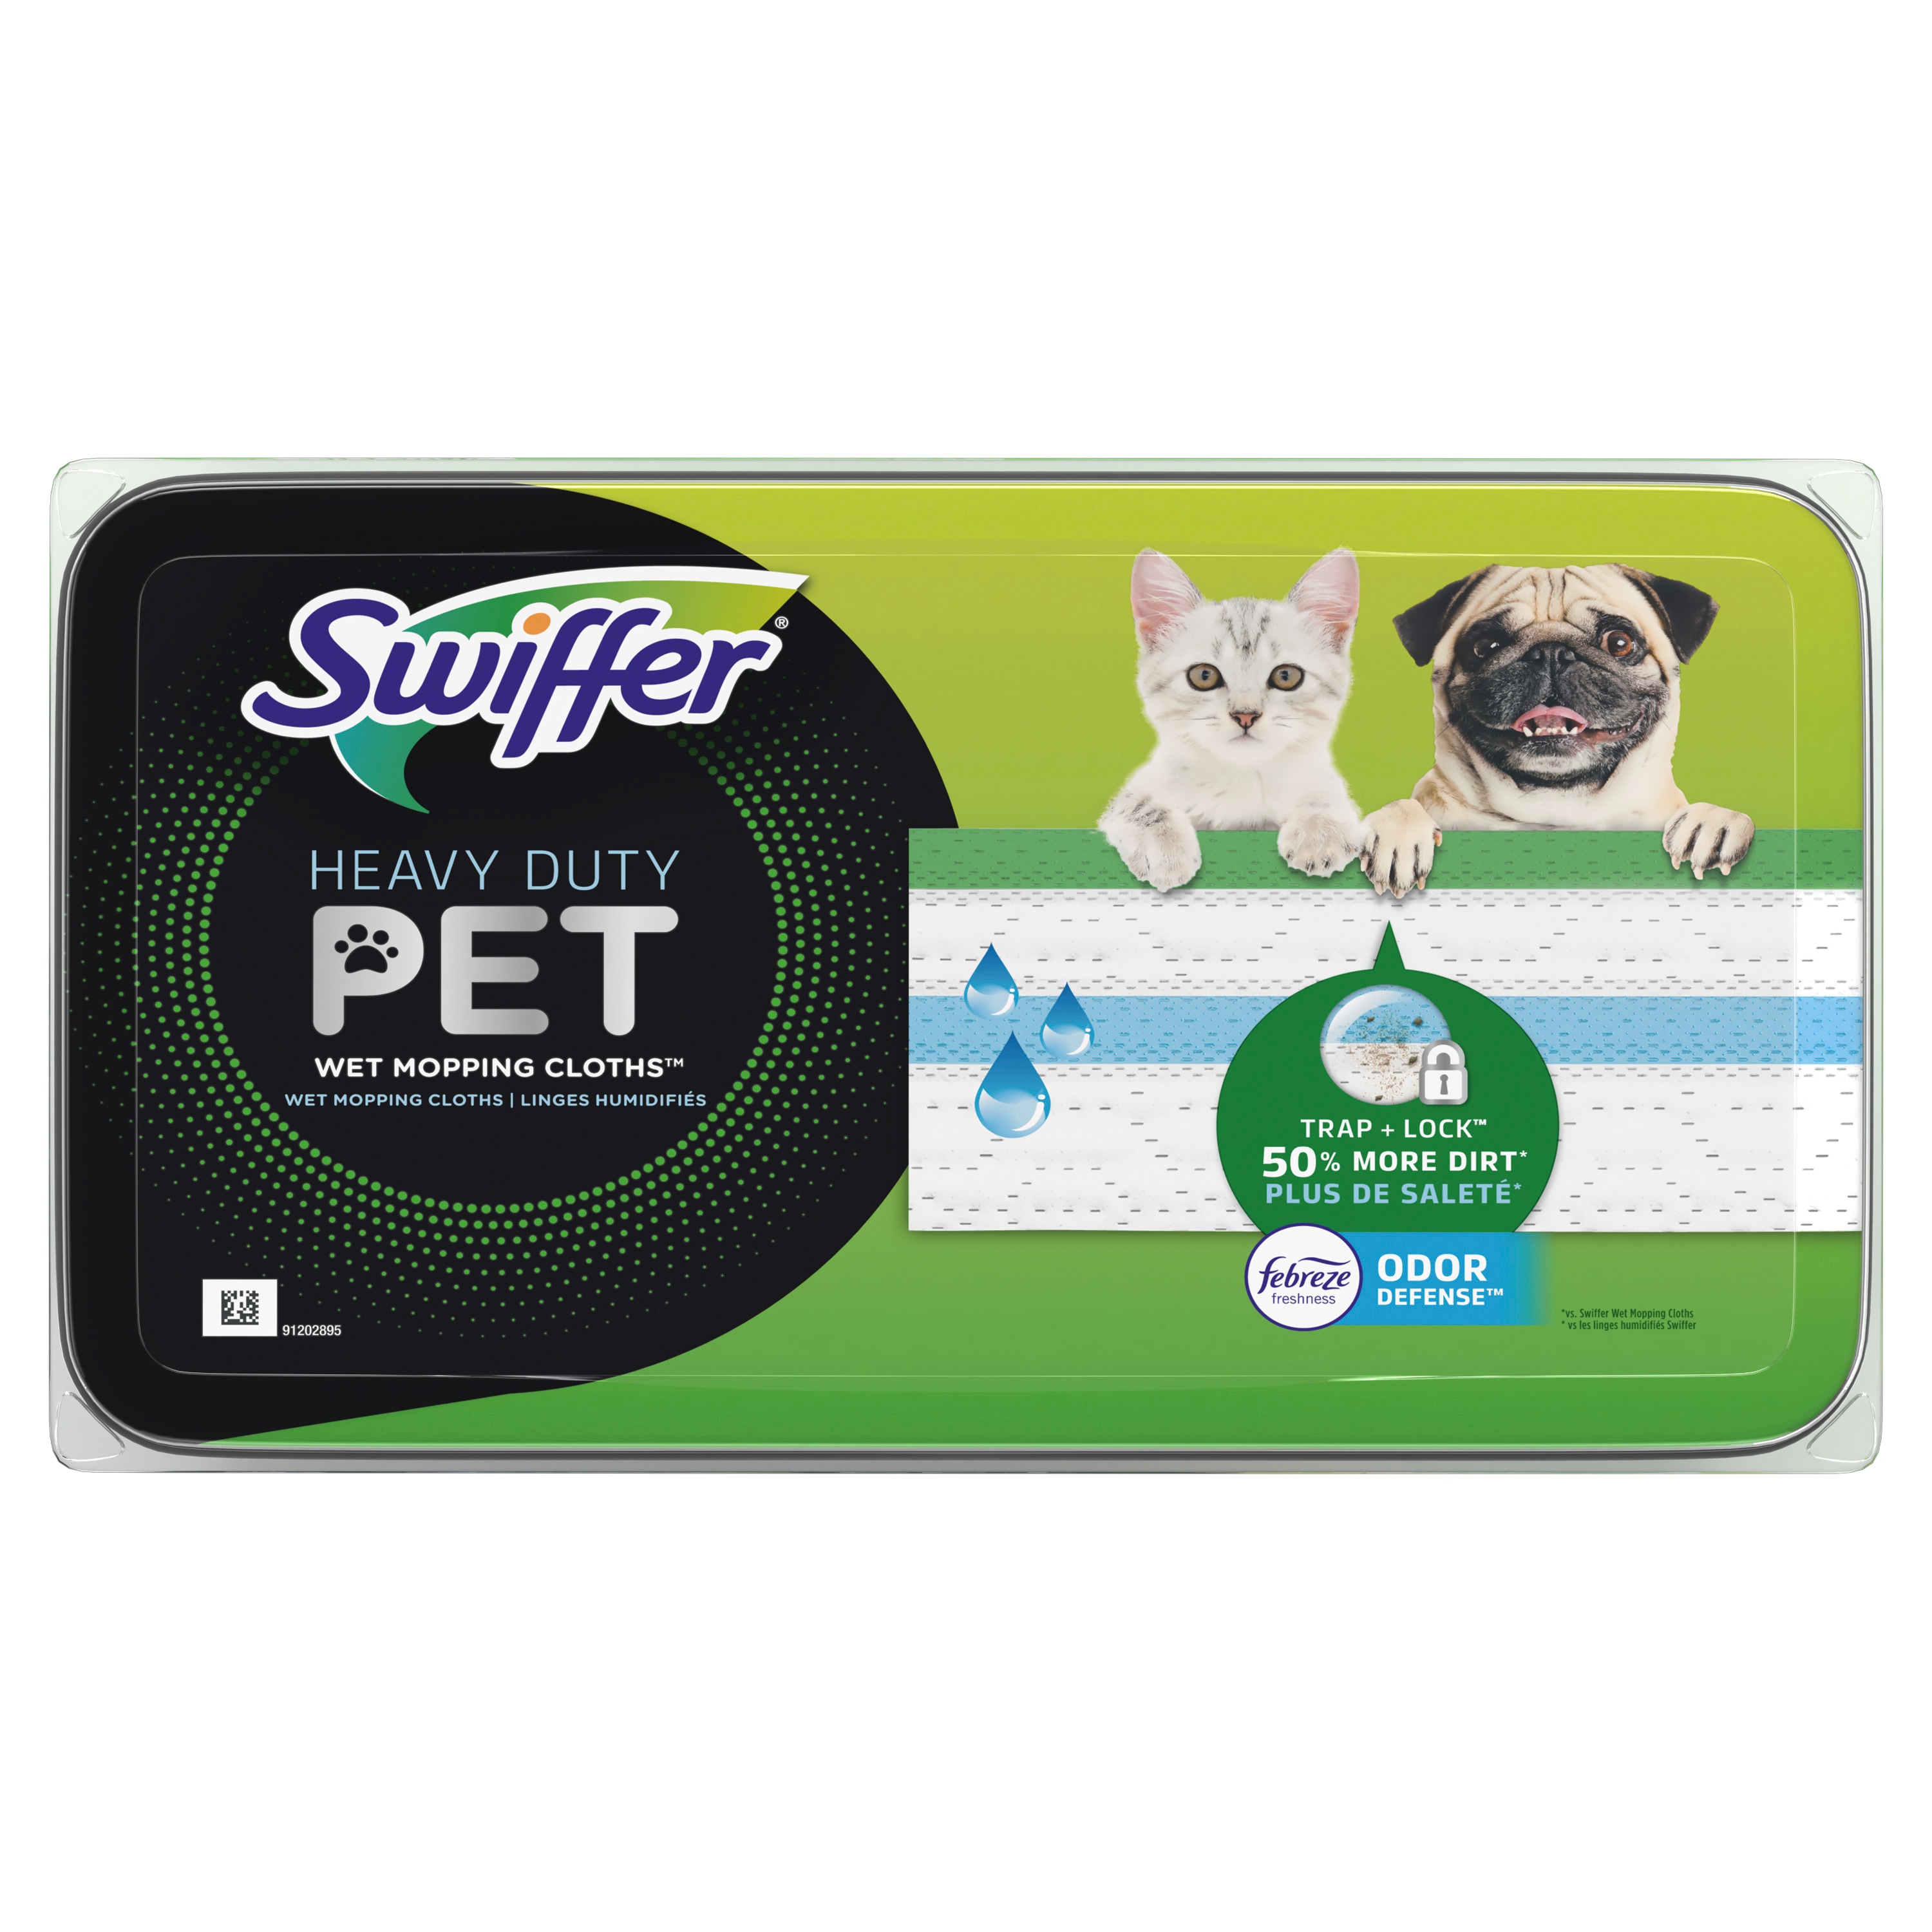 Swiffer Heavy Duty Pet Dry Sweeping Cloth Refills with Febreze Odor Defense 20 ct